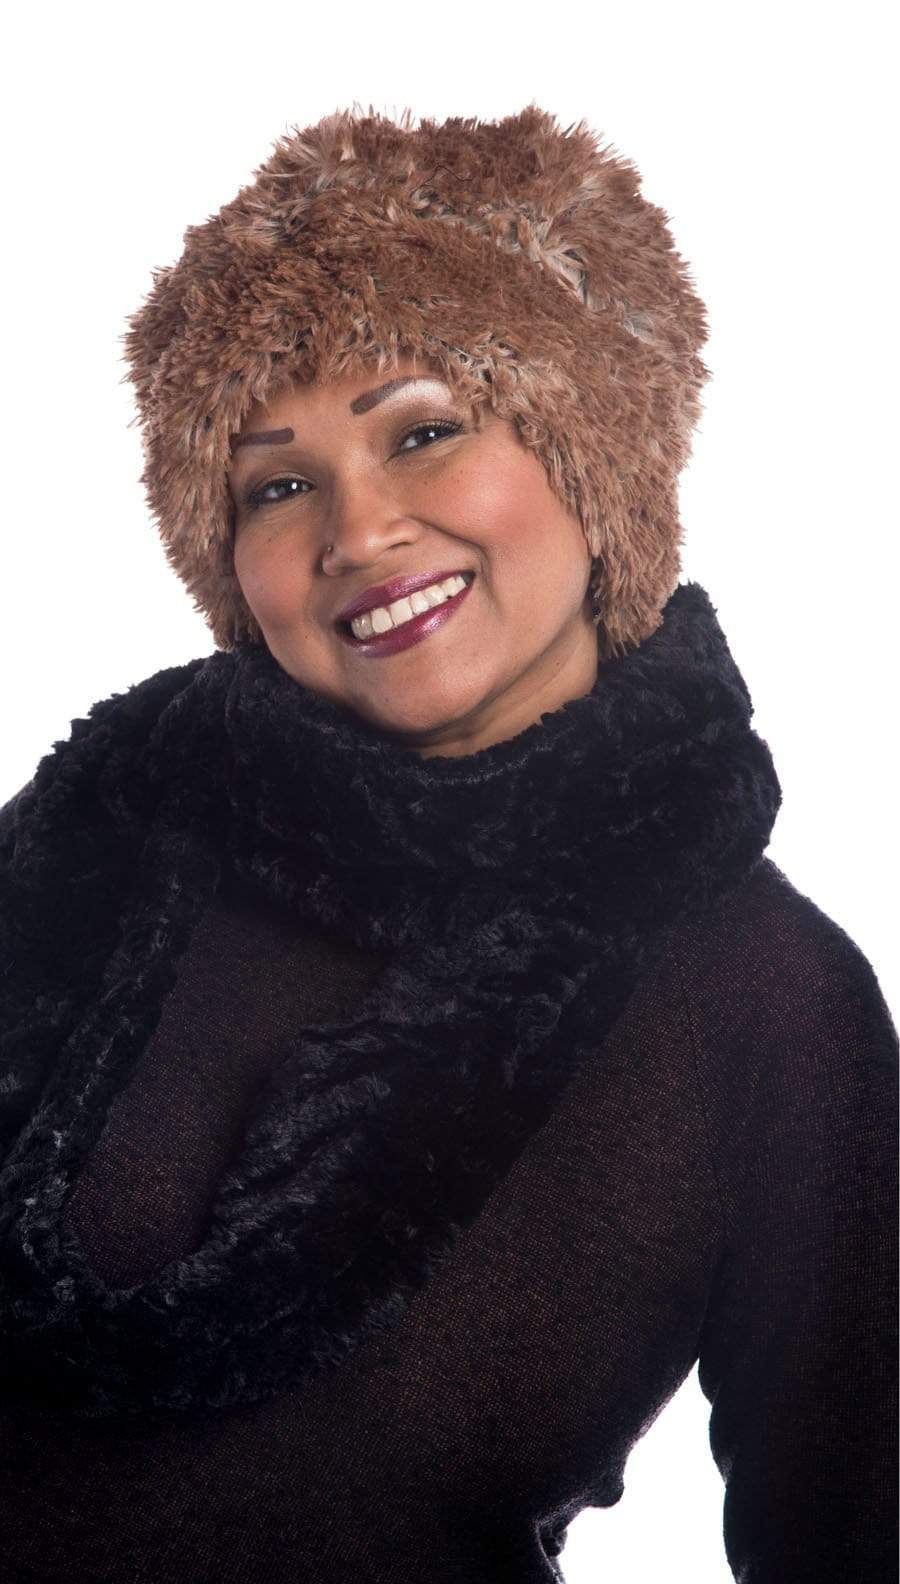 Woman modeling Beanie reversible in Red Fox and Cuddly Black Faux Fur. Handmade by Pandemonium Millinery in Seattle, WA.